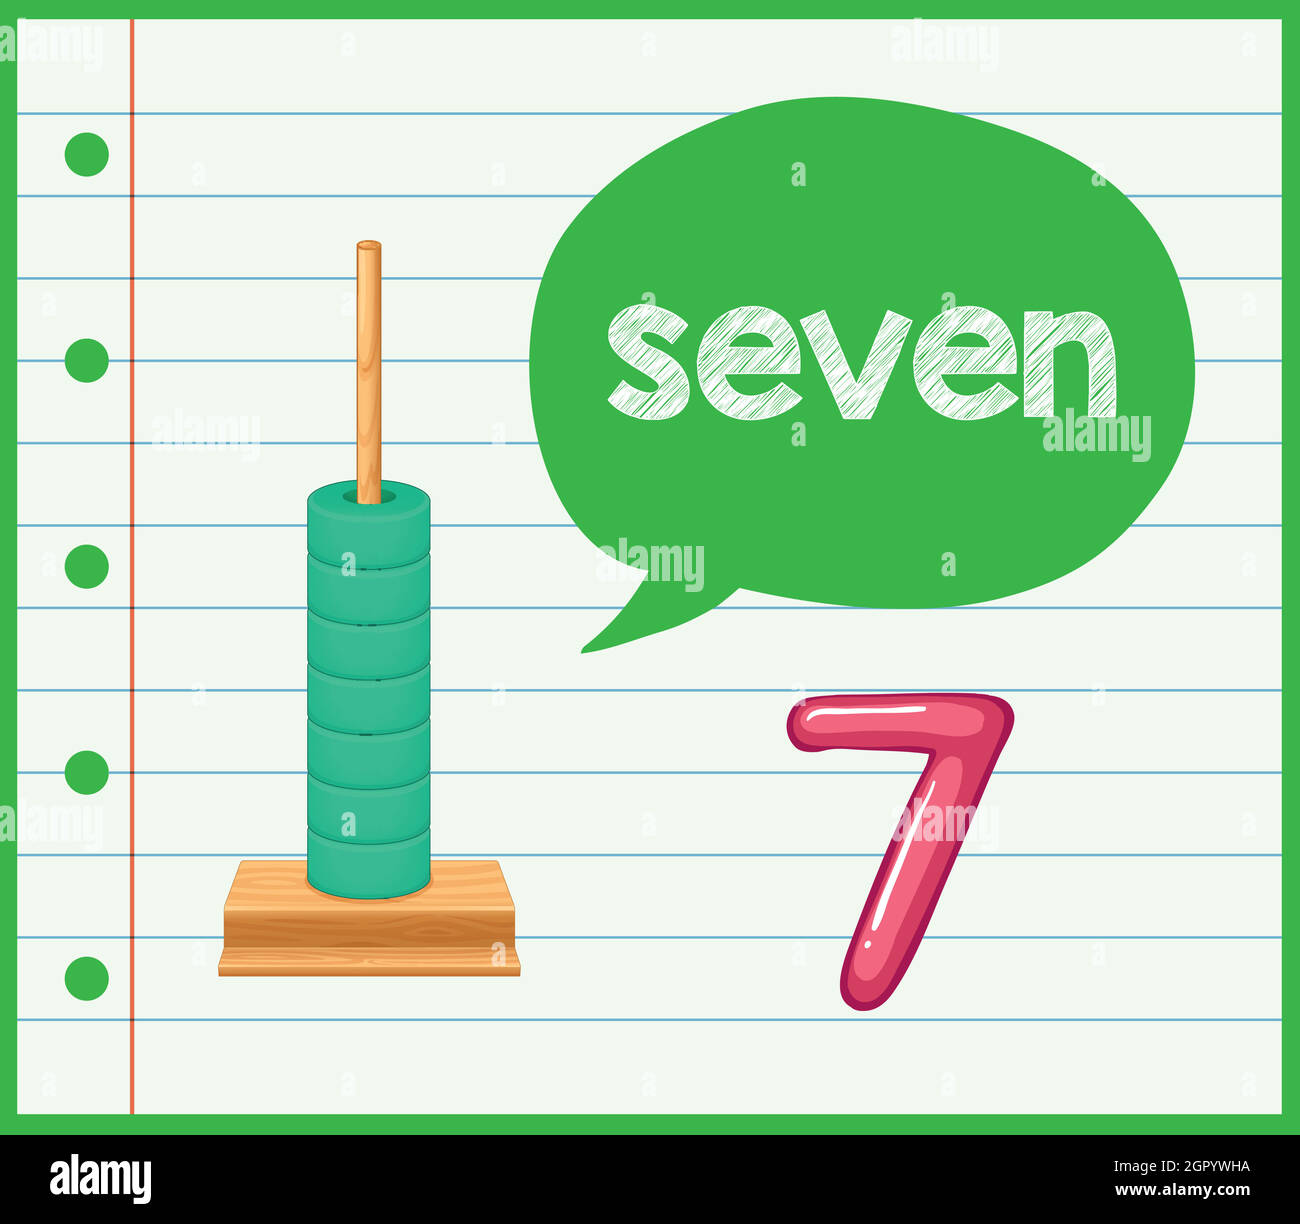 Abacus and number 7 Stock Vector